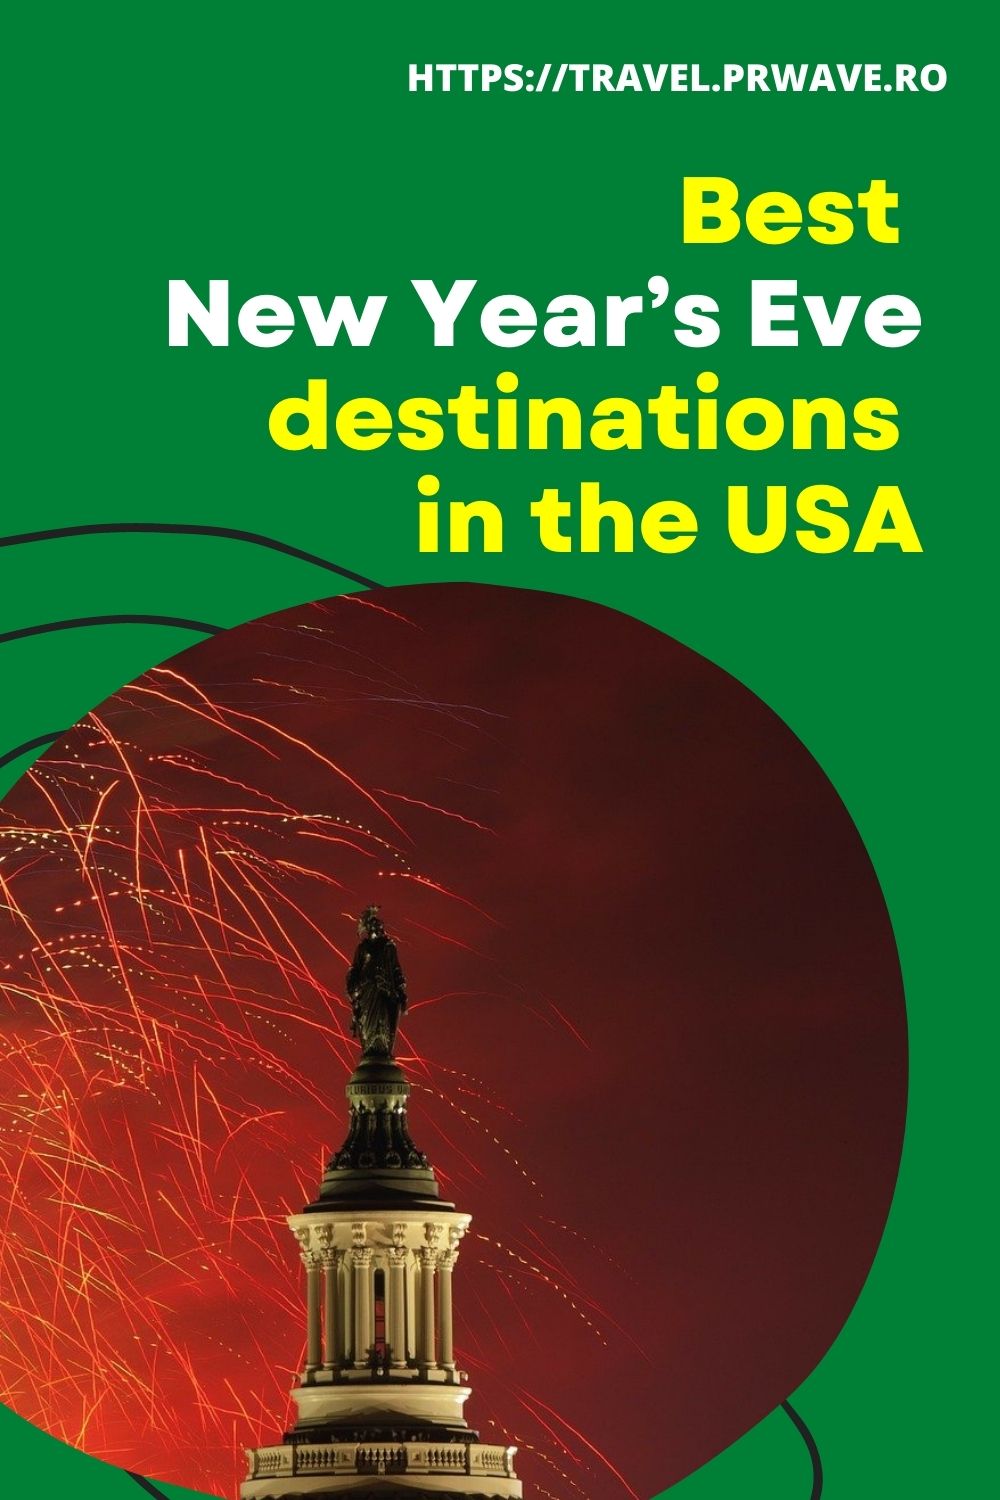 Wondering what are the best places to go for New Year's Eve in the US? Discover the best New Year's Eve destinations in the USA. These are the best cities to celebrate New Year's Eve in the US. #newyearseve #winterholidays #usa #usatravel #usanye #nye #nyeusa #usabestcities